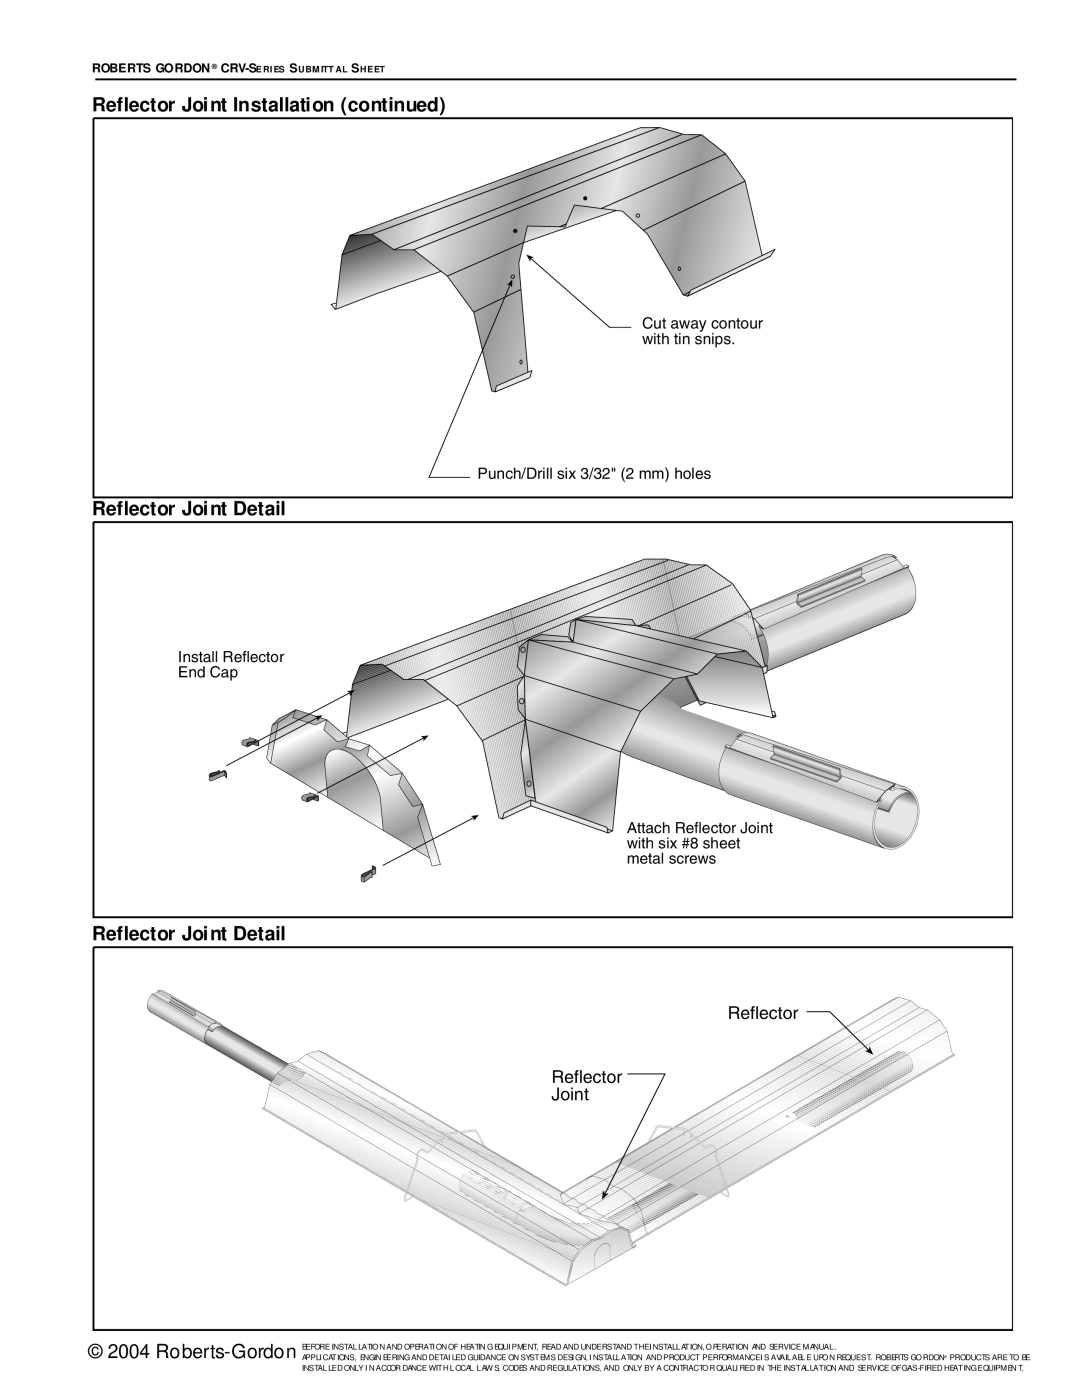 Roberts Gorden CRV-Series service manual Reflector Joint Installation continued, Reflector Joint Detail 